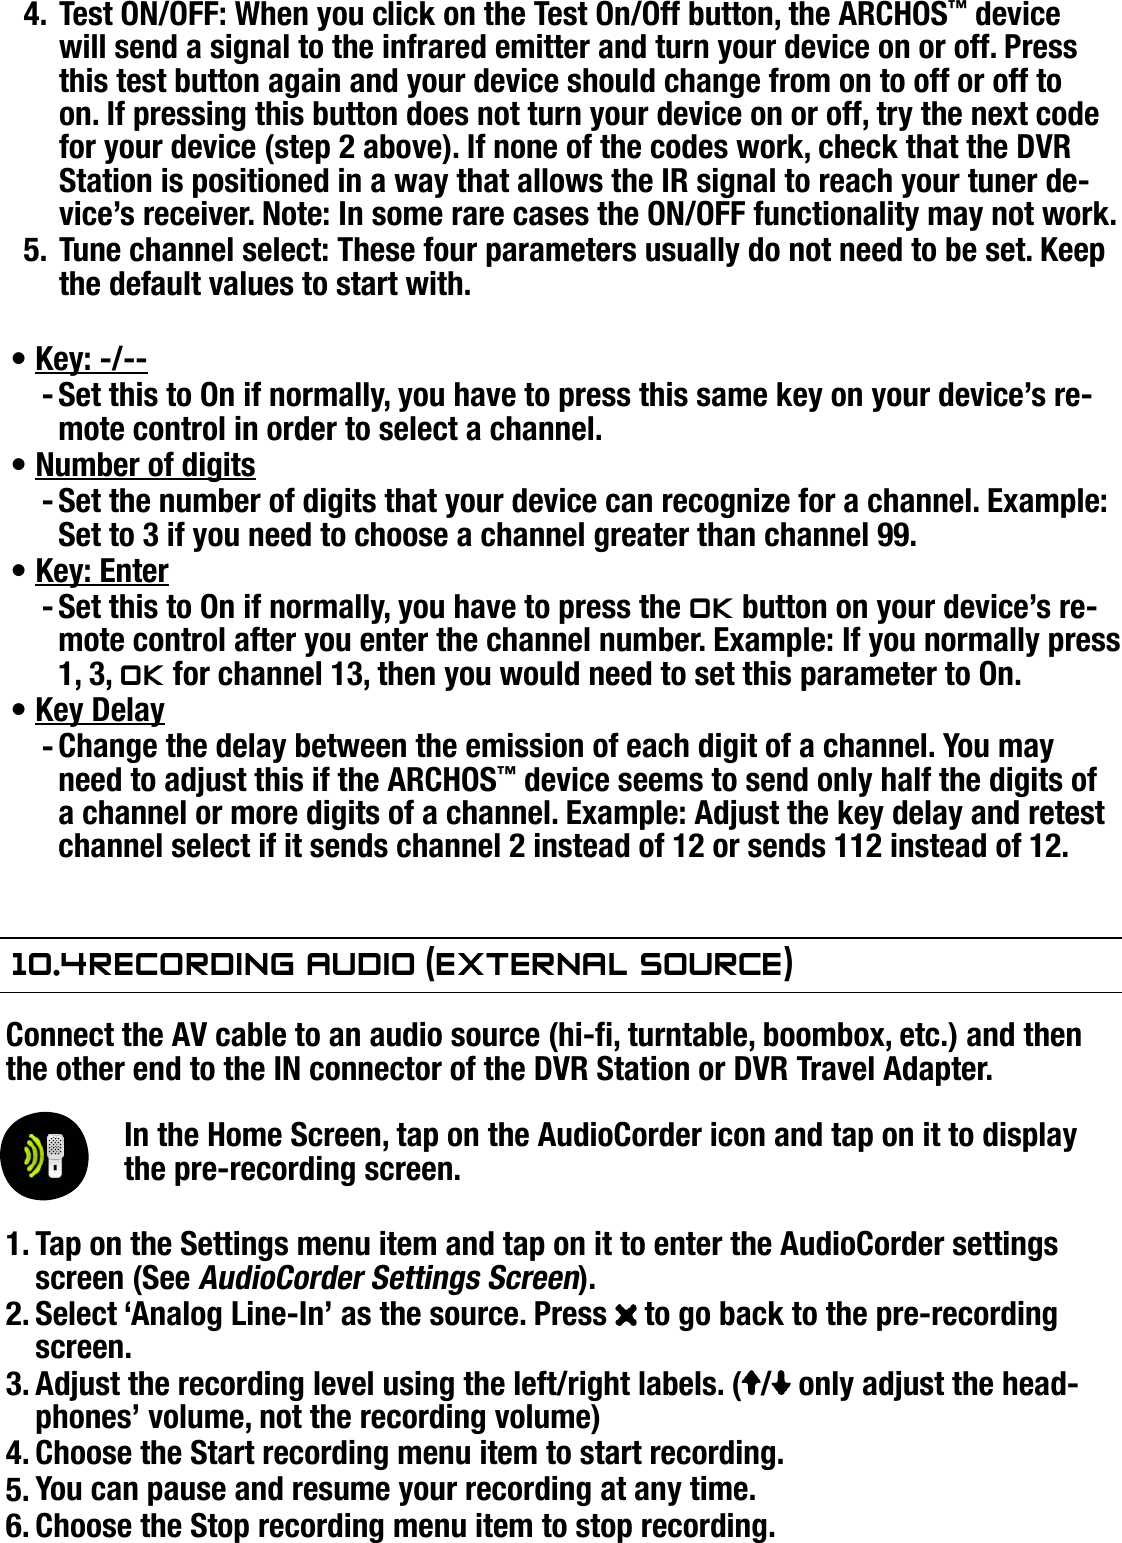 704MANUAL V0.0OPTIONAL FUNCTIONALITIES   &gt;   p. 63Test ON/OFF: When you click on the Test On/Off button, the ARCHOS™ device will send a signal to the infrared emitter and turn your device on or off. Press this test button again and your device should change from on to off or off to on. If pressing this button does not turn your device on or off, try the next code for your device (step 2 above). If none of the codes work, check that the DVR Station is positioned in a way that allows the IR signal to reach your tuner de-vice’s receiver. Note: In some rare cases the ON/OFF functionality may not work.Tune channel select: These four parameters usually do not need to be set. Keep the default values to start with.Key: -/--Set this to On if normally, you have to press this same key on your device’s re-mote control in order to select a channel.Number of digitsSet the number of digits that your device can recognize for a channel. Example: Set to 3 if you need to choose a channel greater than channel 99.Key: EnterSet this to On if normally, you have to press the Ok button on your device’s re-mote control after you enter the channel number. Example: If you normally press 1, 3, Ok for channel 13, then you would need to set this parameter to On.Key DelayChange the delay between the emission of each digit of a channel. You may need to adjust this if the ARCHOS™ device seems to send only half the digits of a channel or more digits of a channel. Example: Adjust the key delay and retest channel select if it sends channel 2 instead of 12 or sends 112 instead of 12.10.4 reCOrding audiO (exTernal sOurCe)Connect the AV cable to an audio source (hi-, turntable, boombox, etc.) and then the other end to the IN connector of the DVR Station or DVR Travel Adapter.In the Home Screen, tap on the AudioCorder icon and tap on it to display the pre-recording screen.Tap on the Settings menu item and tap on it to enter the AudioCorder settings screen (See AudioCorder Settings Screen).Select ‘Analog Line-In’ as the source. Press   to go back to the pre-recording screen.Adjust the recording level using the left/right labels. ( /  only adjust the head-phones’ volume, not the recording volume)Choose the Start recording menu item to start recording.You can pause and resume your recording at any time.Choose the Stop recording menu item to stop recording.4.5.•-•-•-•-1.2.3.4.5.6.